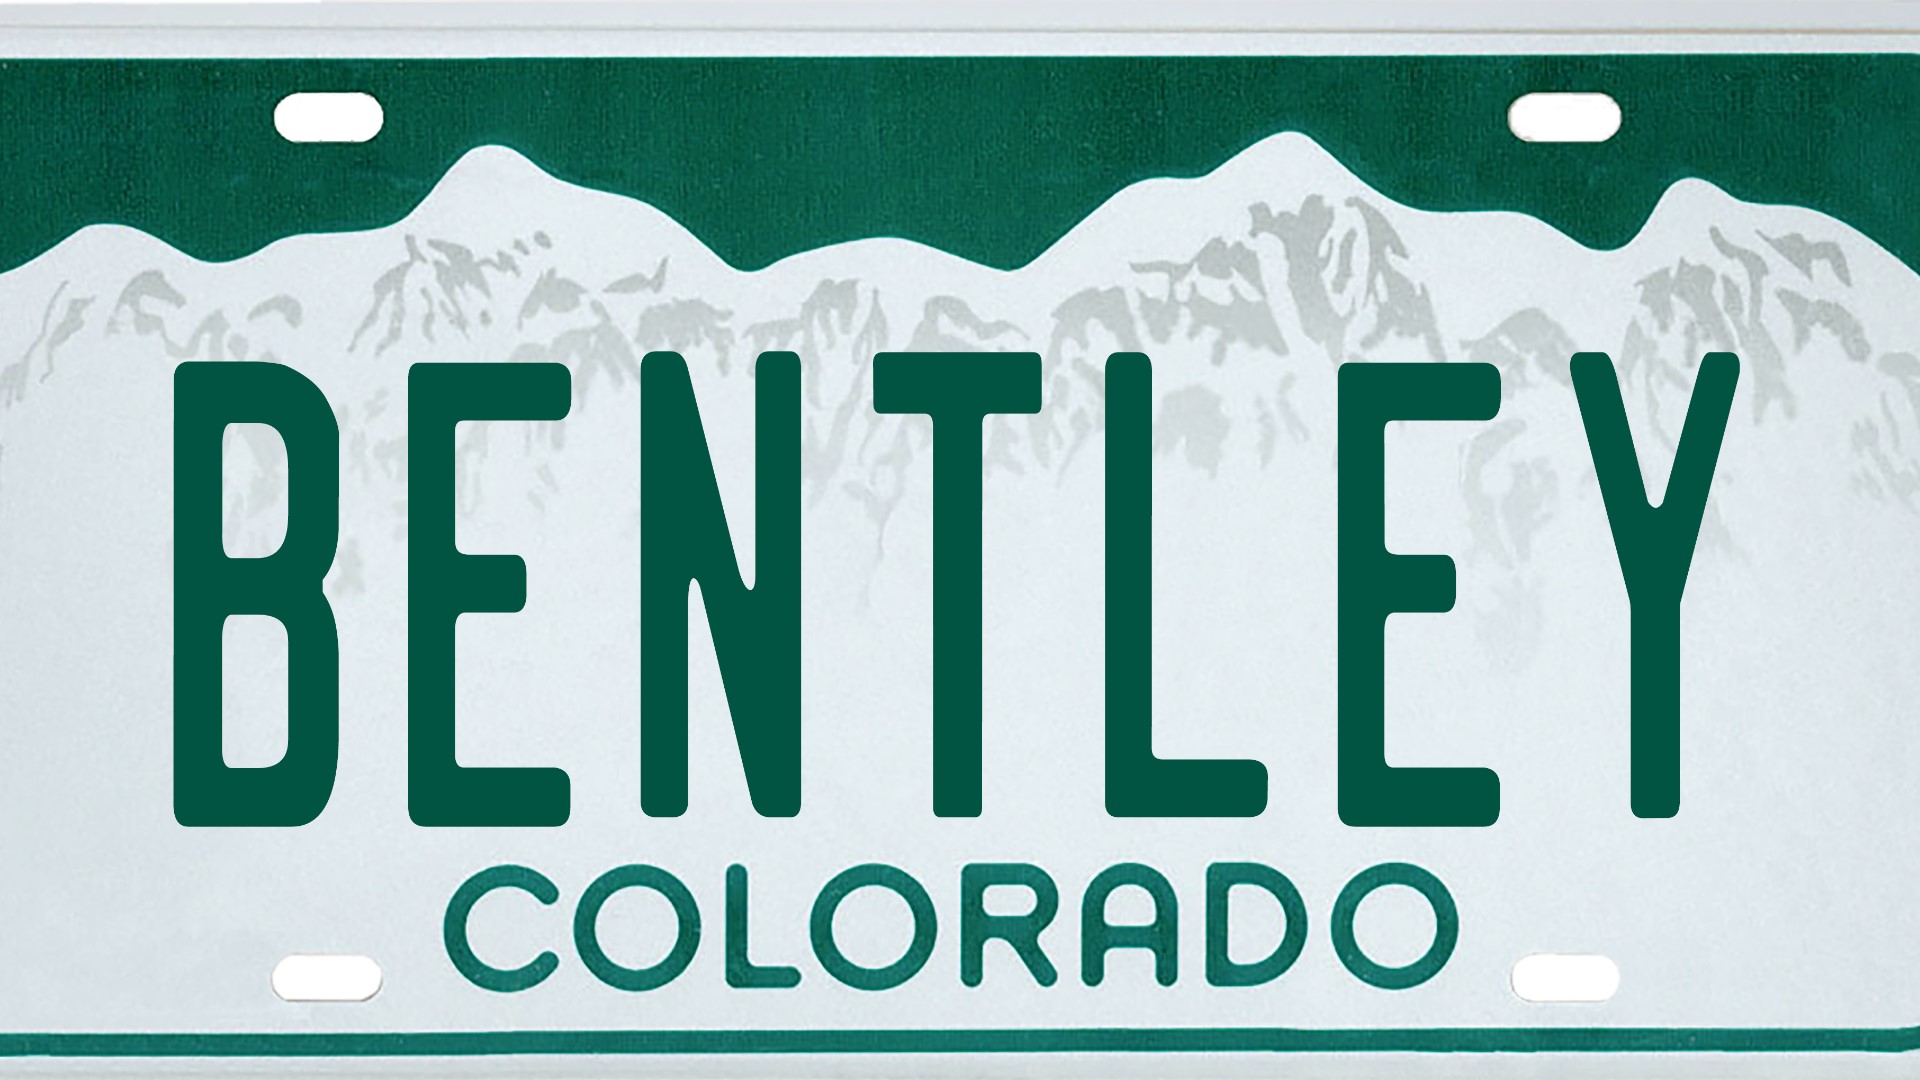 Colorado automotive aficionados will have the exclusive chance to win vanity license plate configurations at a state auction on Saturday, Oct. 12. ColoradoPlates.org